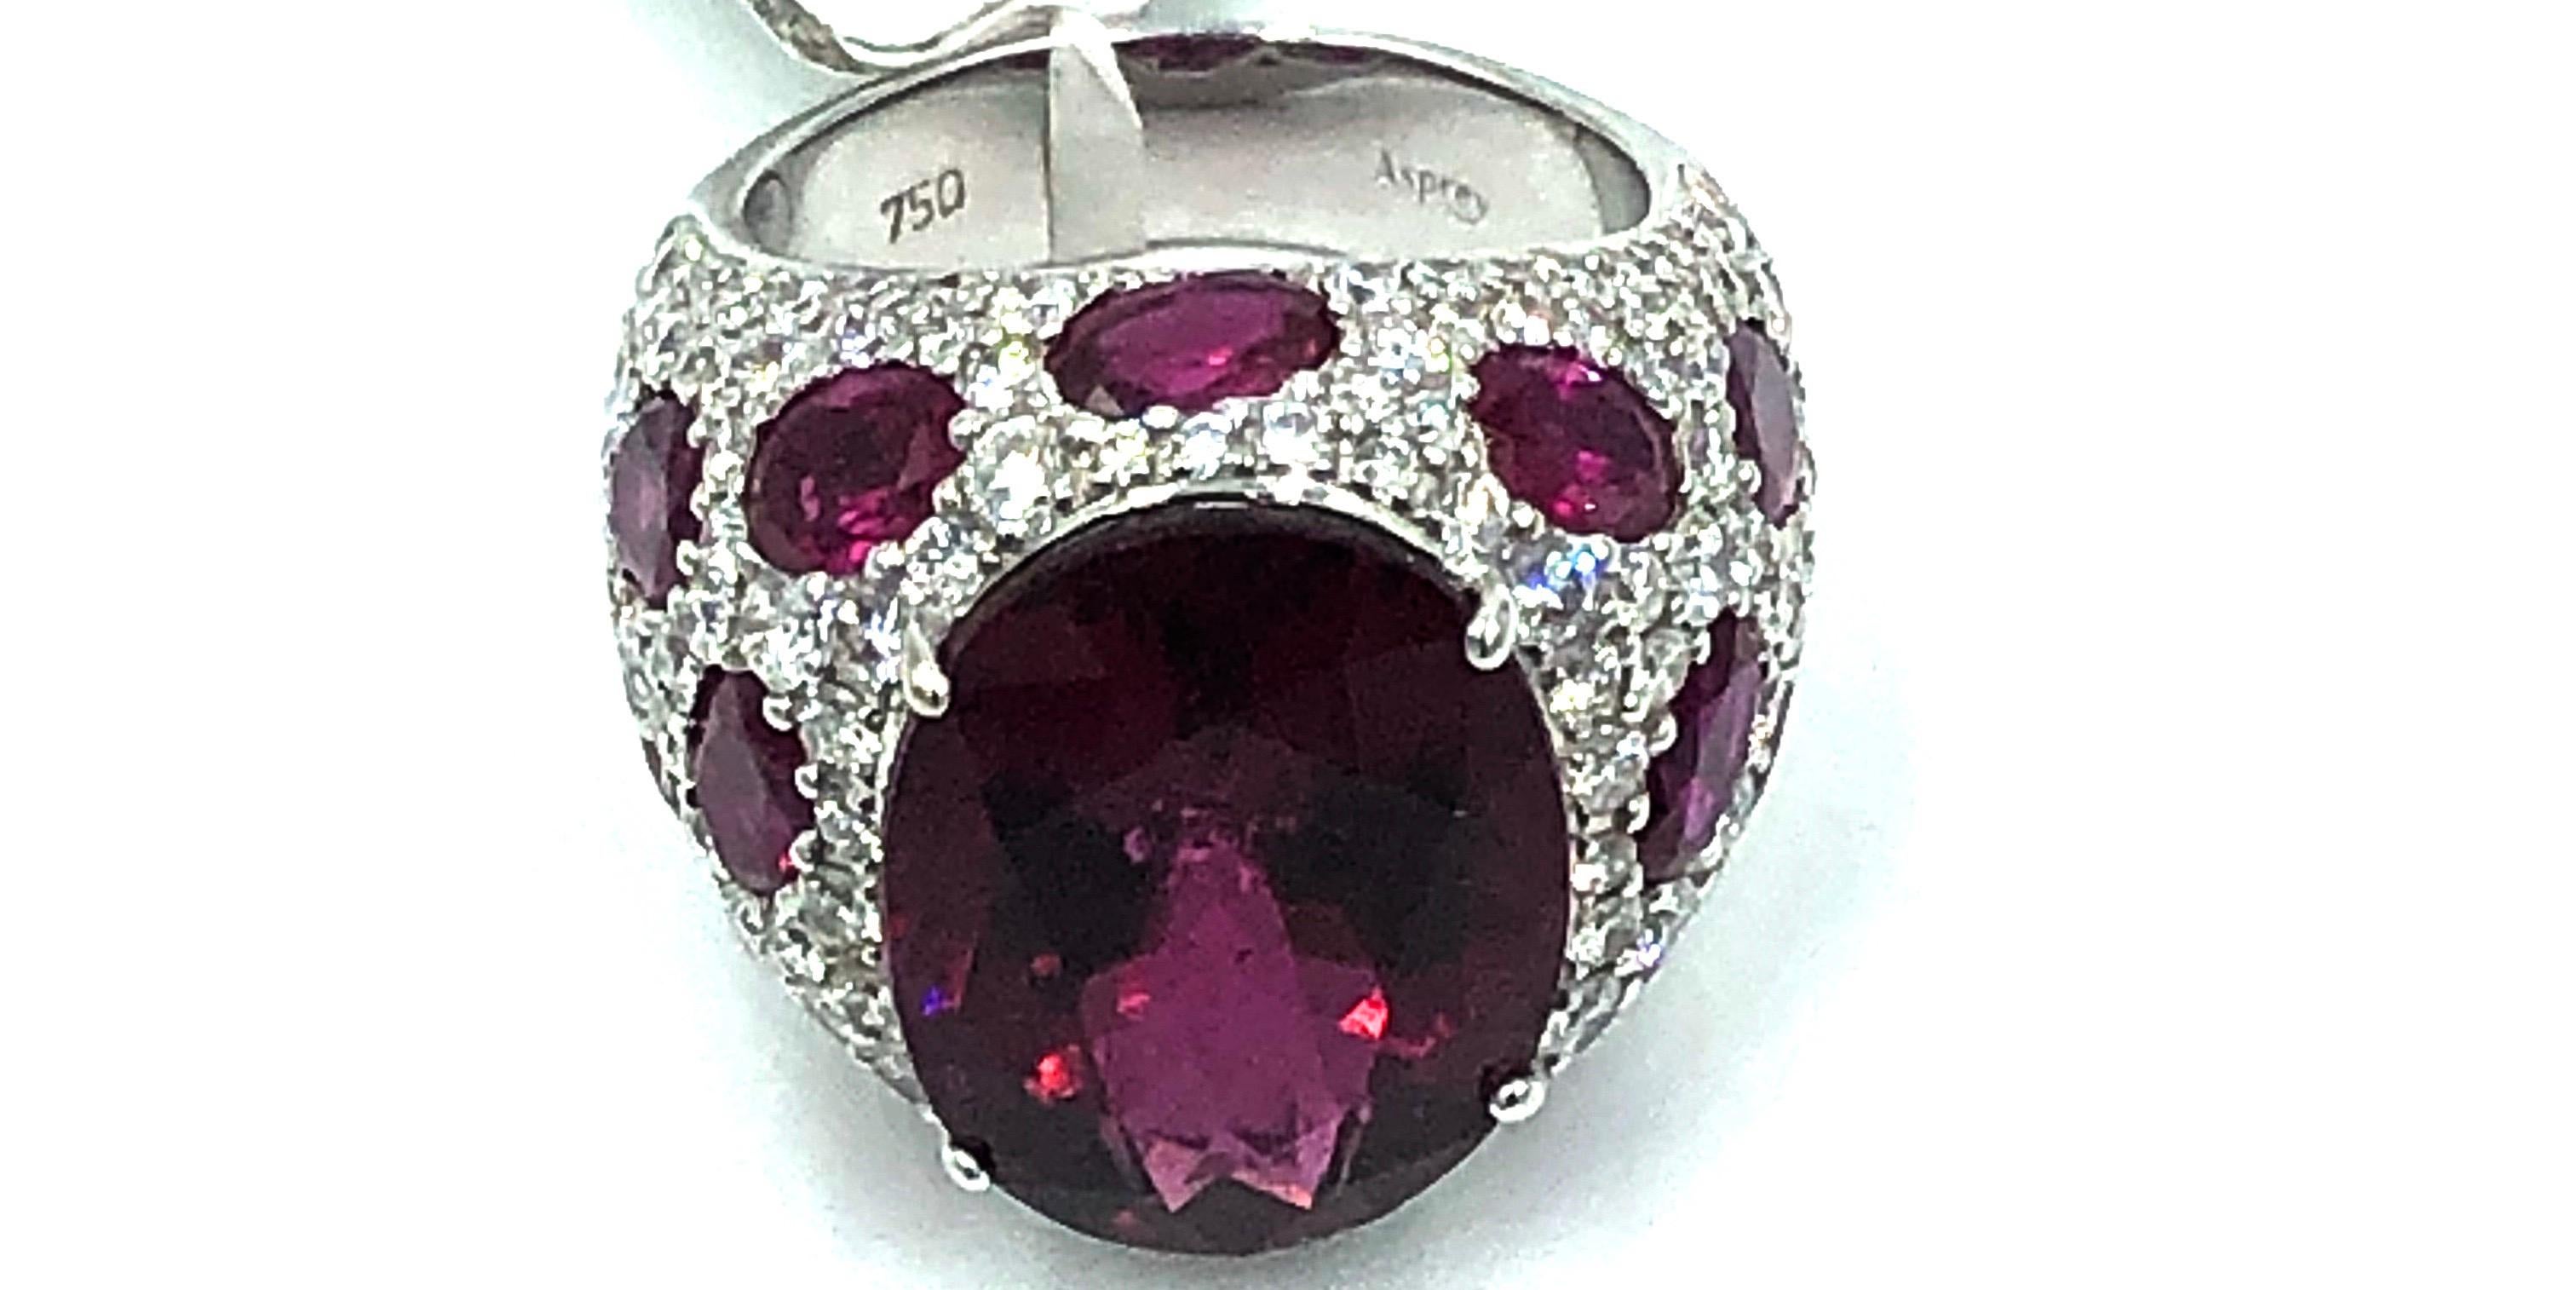 The colors in this beautifully crafted ring From Asprey of London are intense and captivating.
The mounting for the 12.82 ct Rubellite consists of 3.18 carats of pave diamonds and  7.19 carats of stunning red rubies. Elegant, beautiful and timeless,